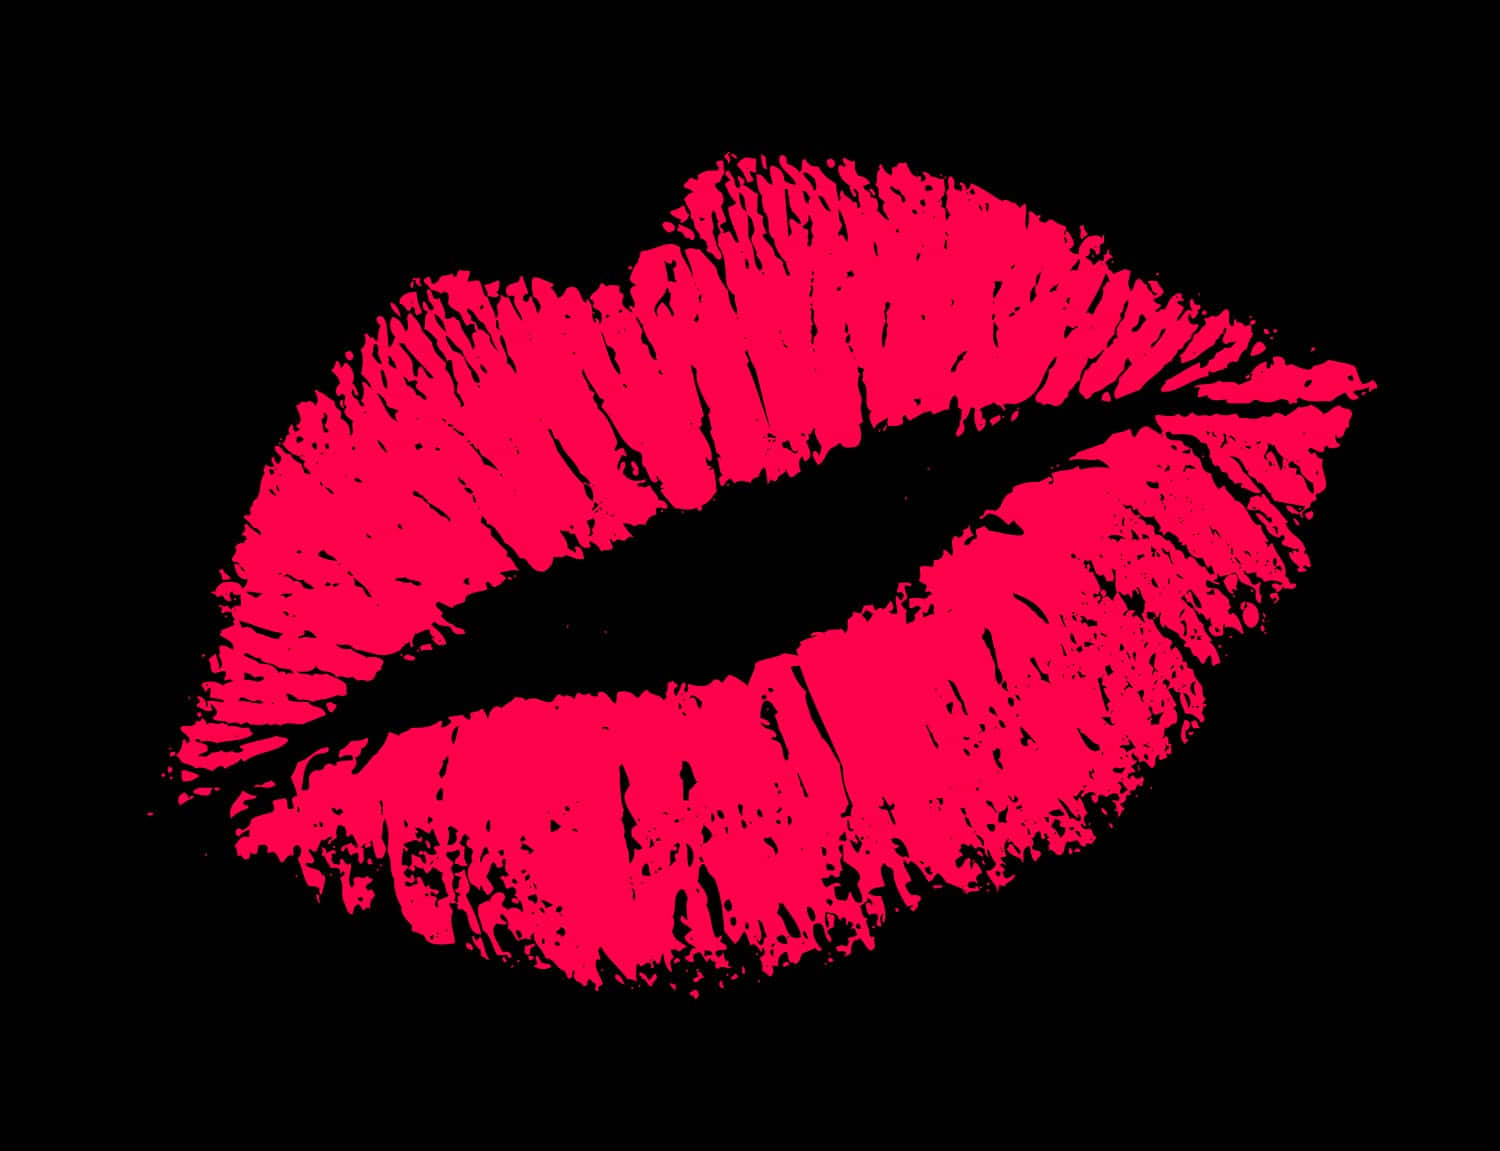 Alluring Red Lips on Black Background